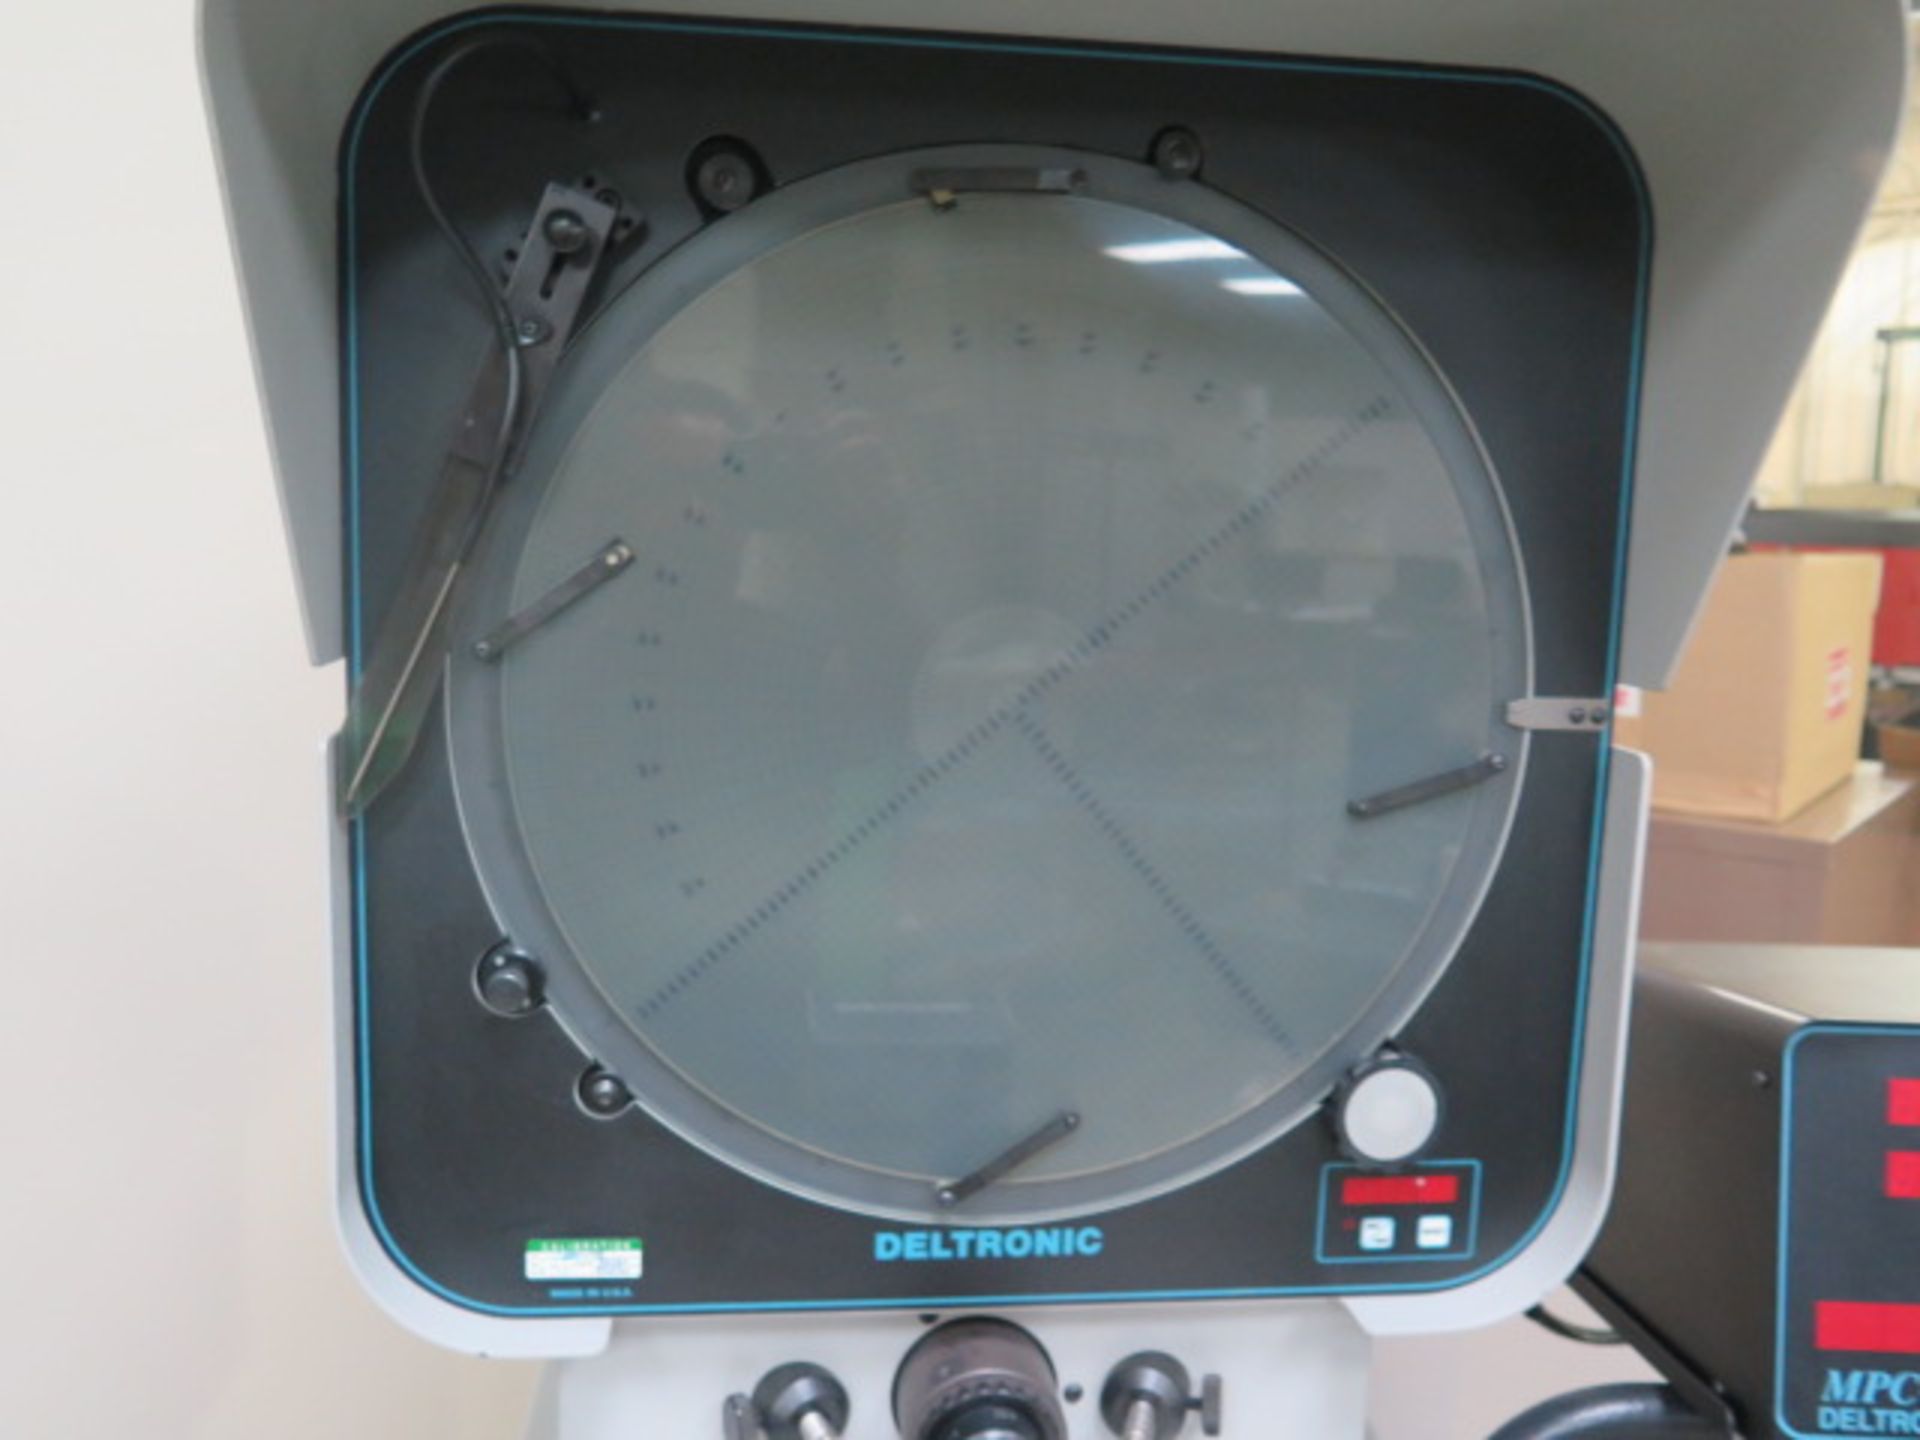 Deltronic DH216-MPC5 15” Optical Comparator s/n 389045807 w/ MPC-5 Programmable DRO, SOLD AS IS - Image 5 of 13